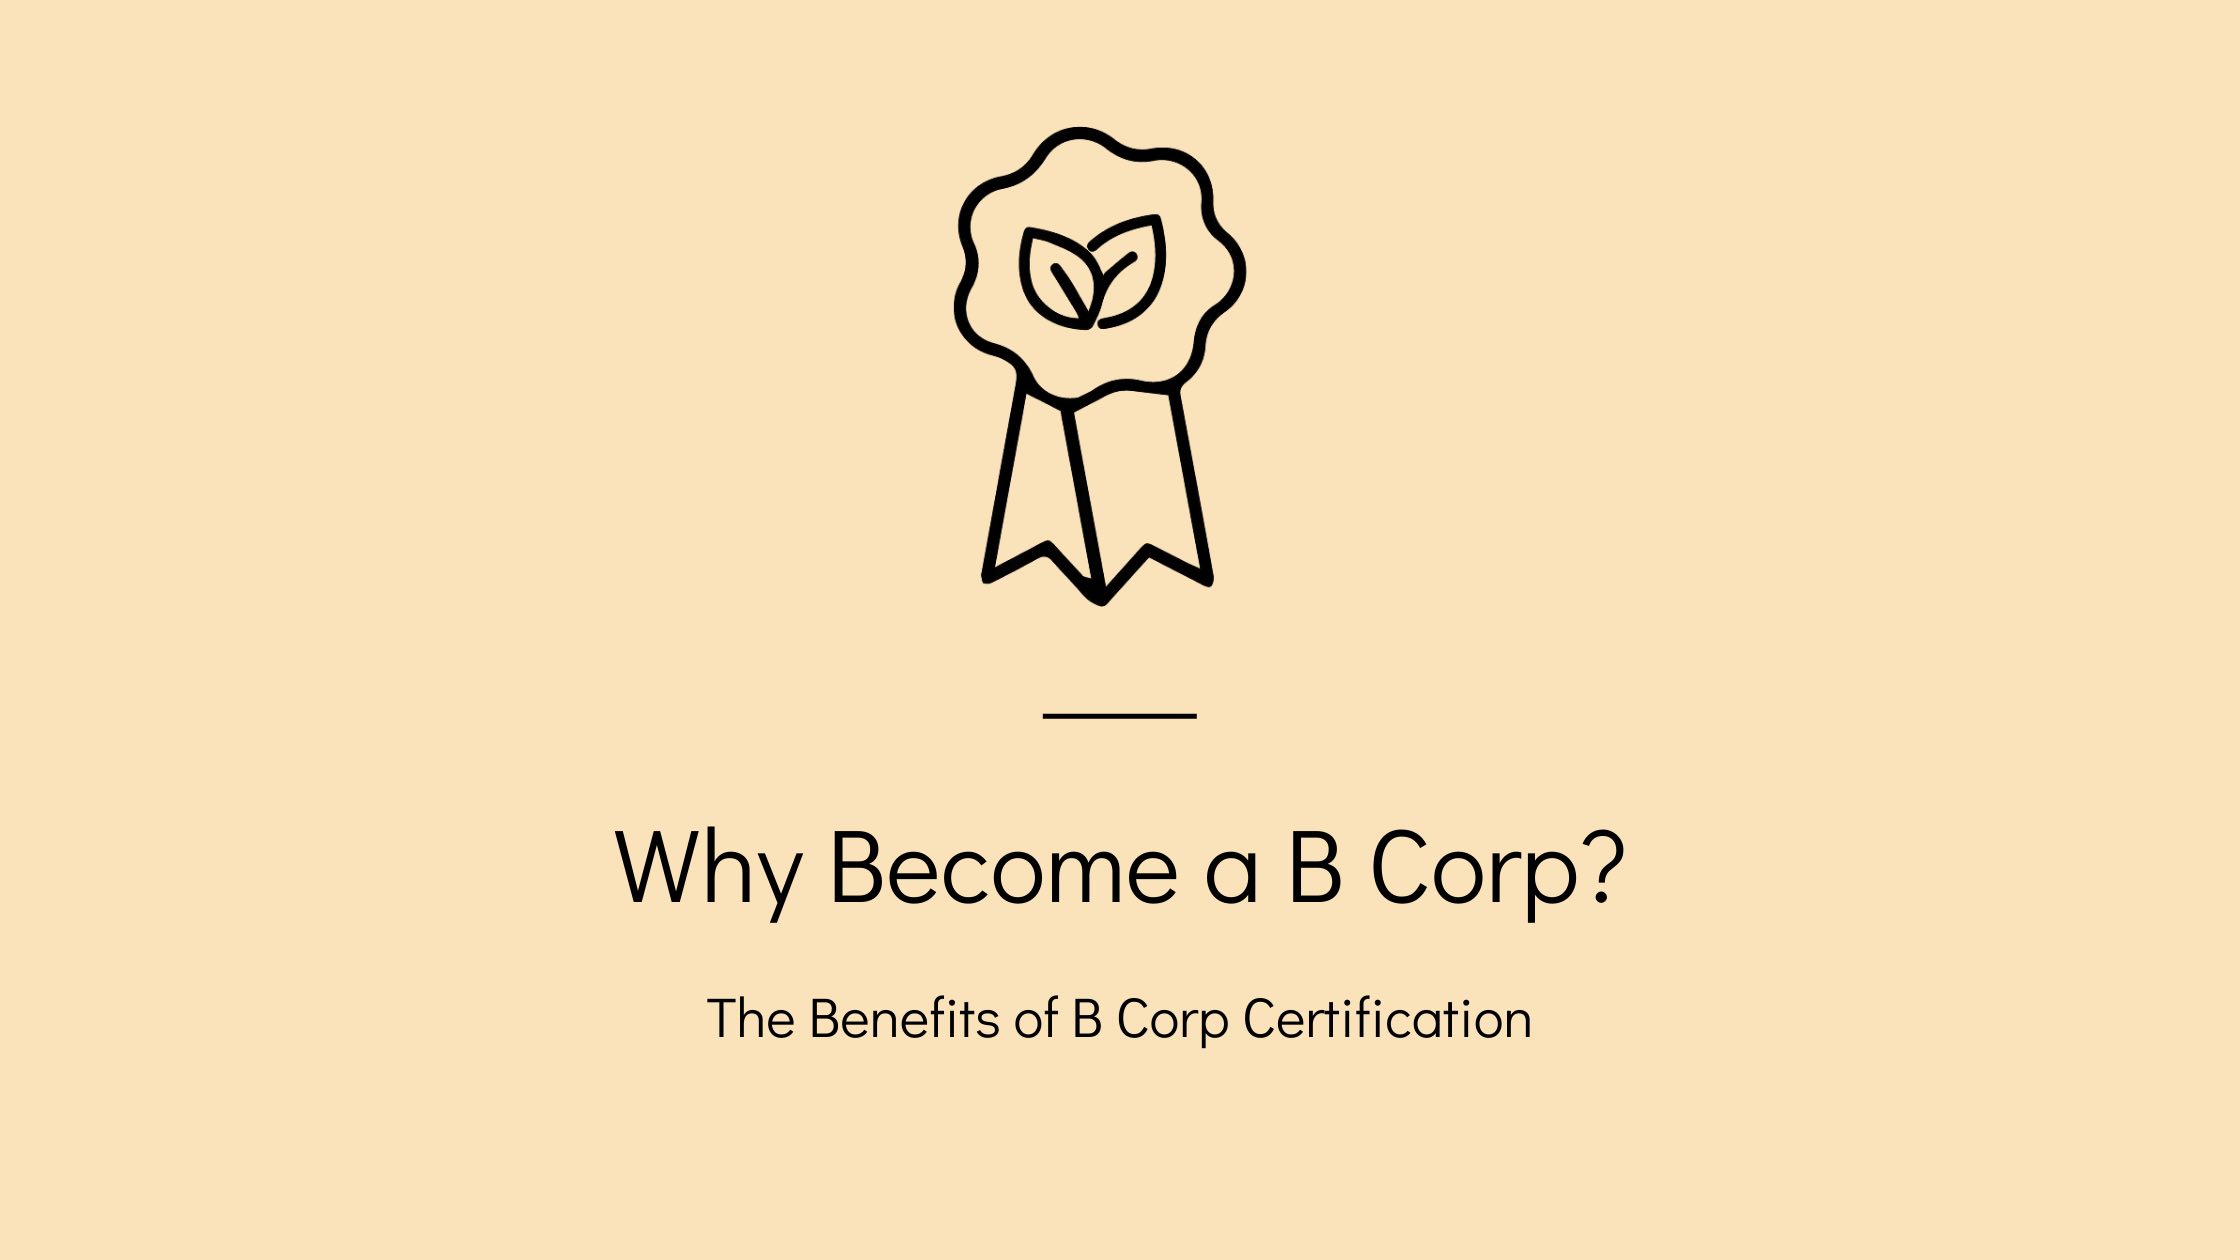 The Benefits of B Corp Certification